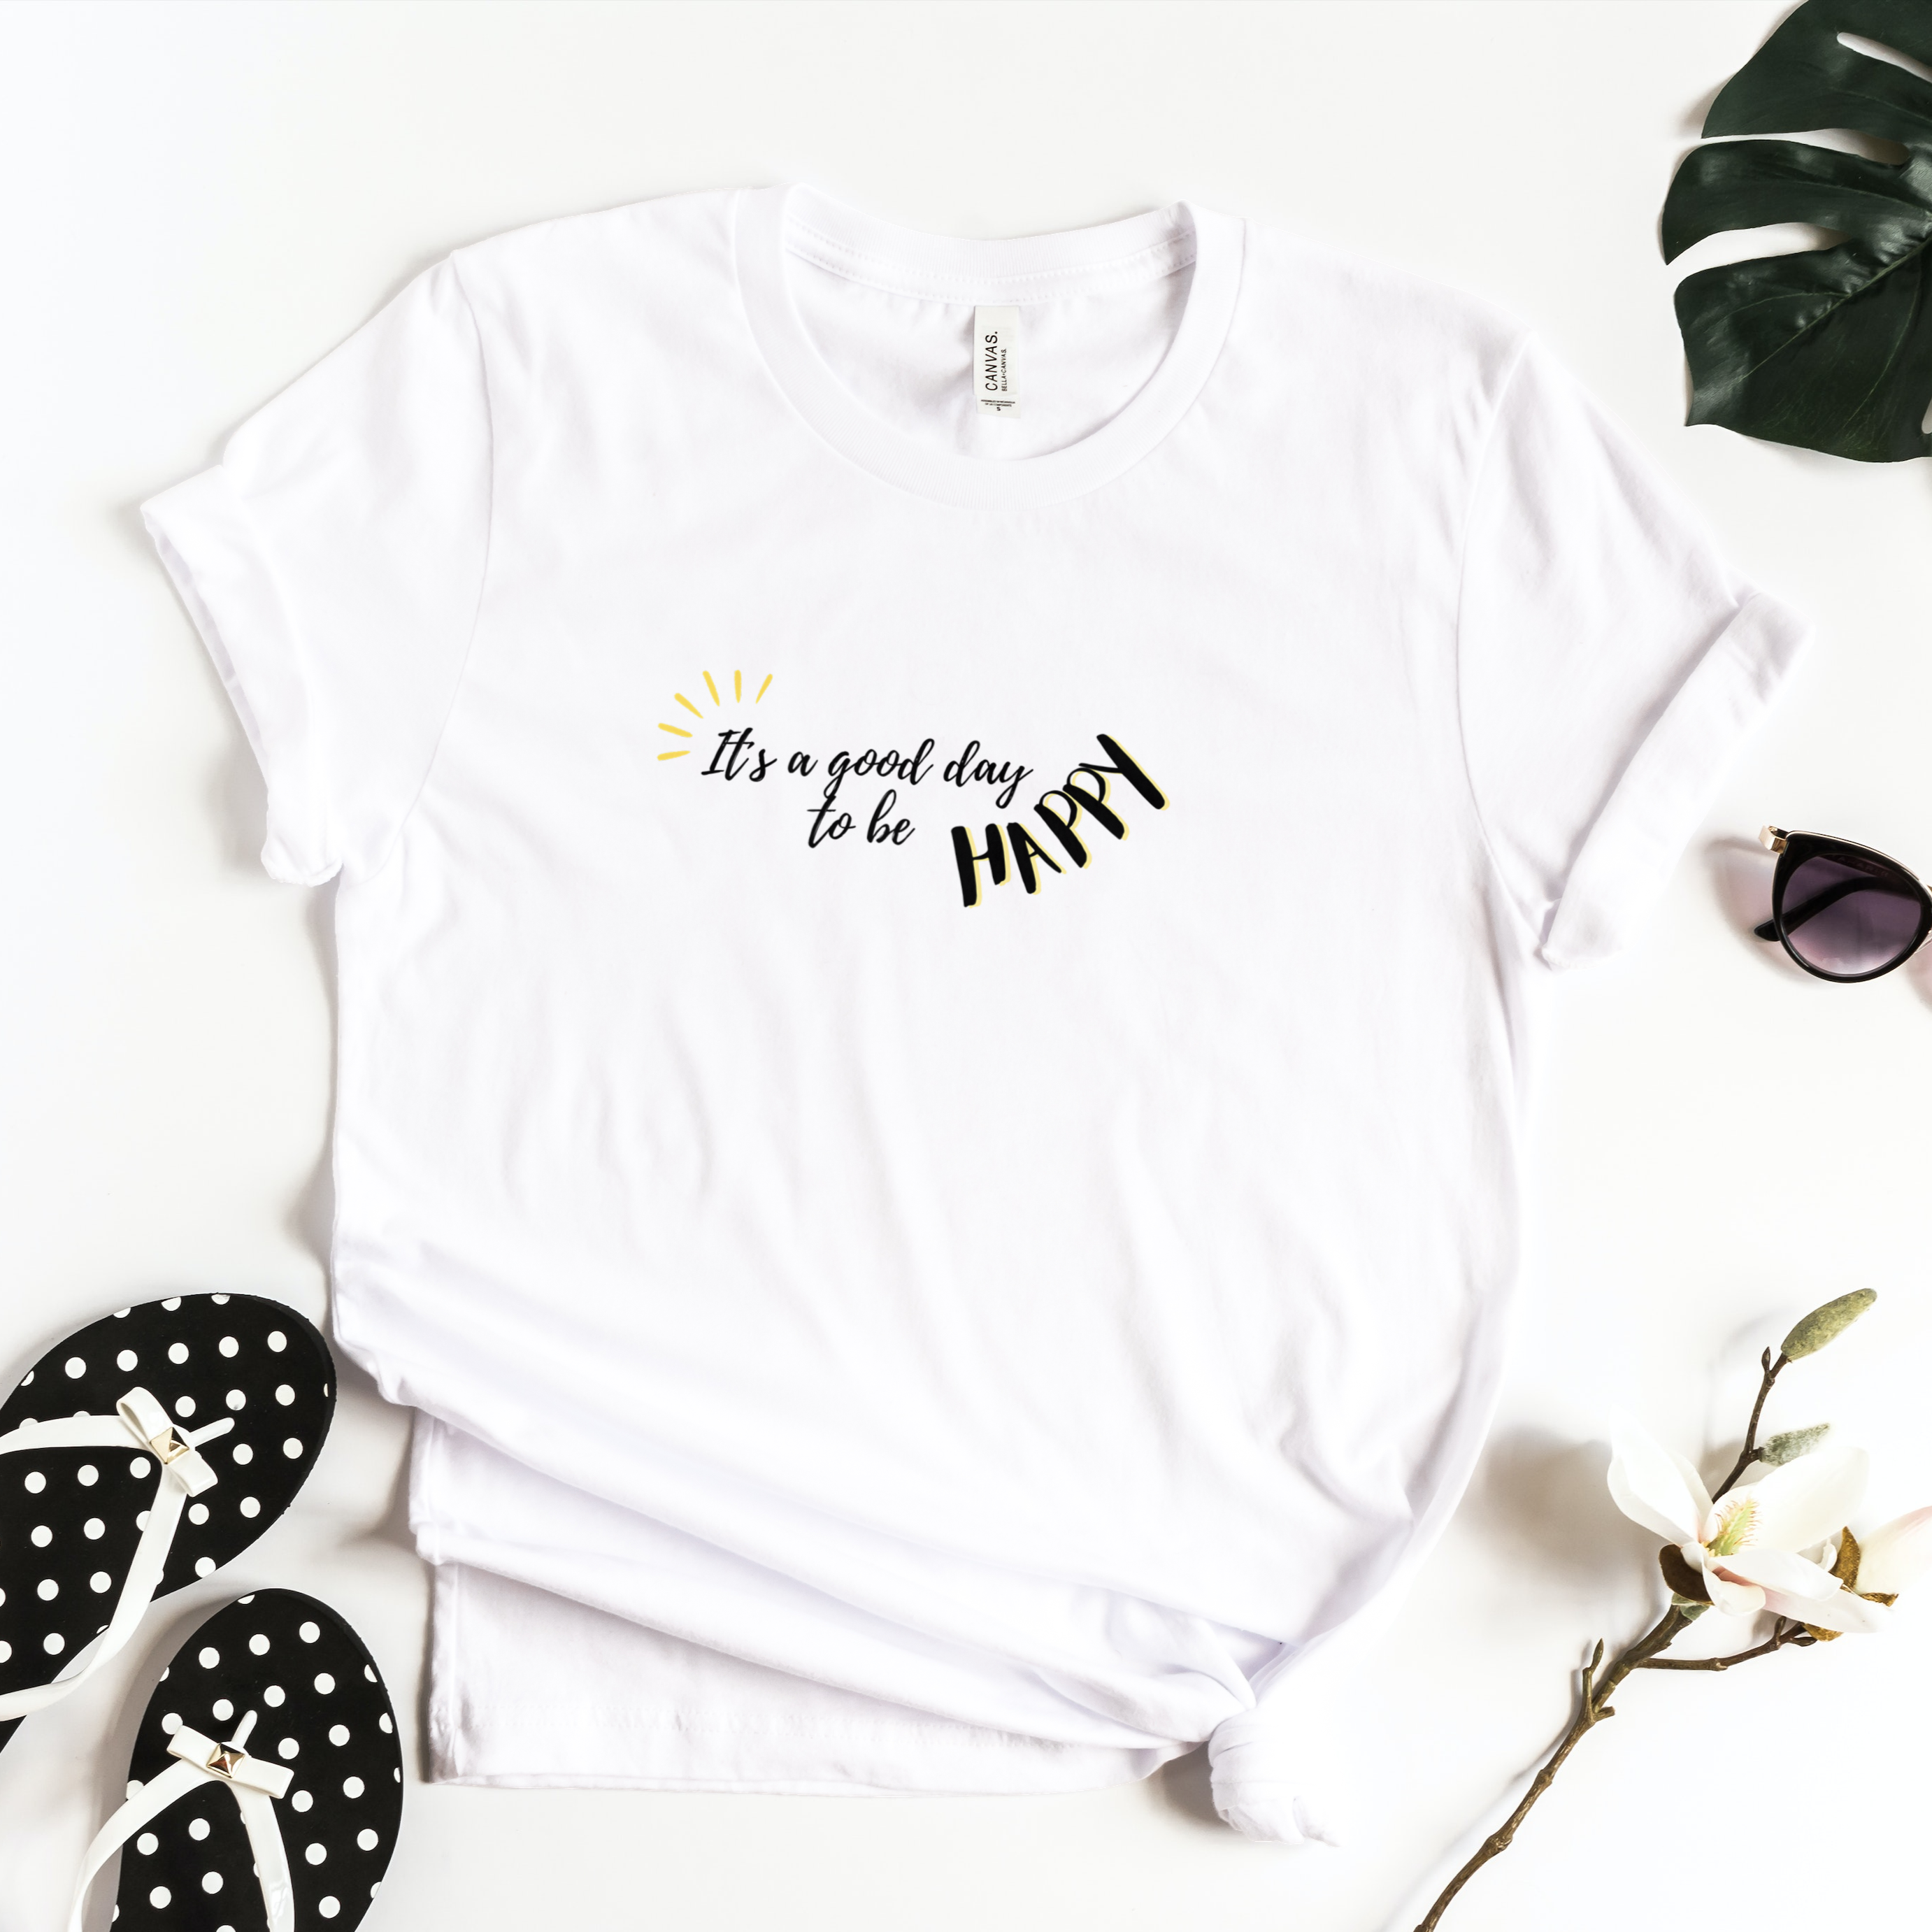 Story of Awakening Lifestyle Community Spirituality Relationships Love Light Meditation Oneness Earth Balance Healing Shop Store Charity Tree Nature Read Write T shirt Tops Tees Clothing Women Horoscope Organic Cotton Good Day To Be Happy Quote